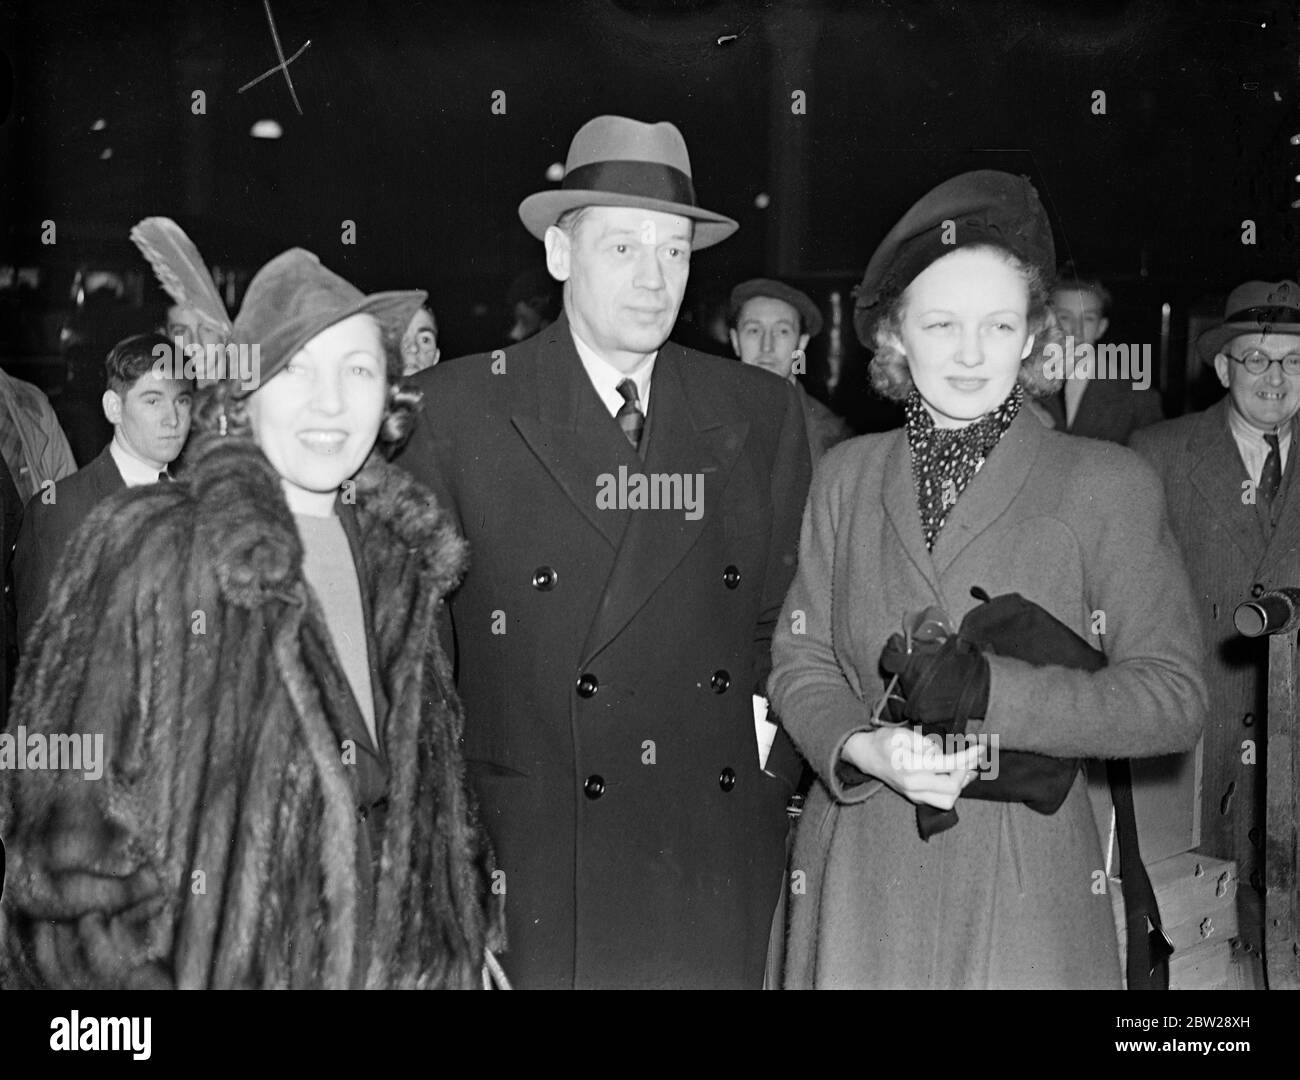 Ely Culbertson arrives in London as wife seeks Reno divorce. Mr Ely Culbertson, the American bridge player, arrived at Paddington station on the 'Queen Mary'boat train to spend Christmas in England. His wife is on her way to Reno to obtain a divorce from him after 14 years of married life. 'I hope that after the divorce, we shall remain bridge partners', says Mr Culbertson. 'I still love her, I shall never marry again'. Photo shows, Mr Ely Culbertson with Mrs Charles Butterworth (left) and Lady Jersey (right) on arrival at Paddington. Lady Jersey was formally Virginia Cherrill, the film actres Stock Photo